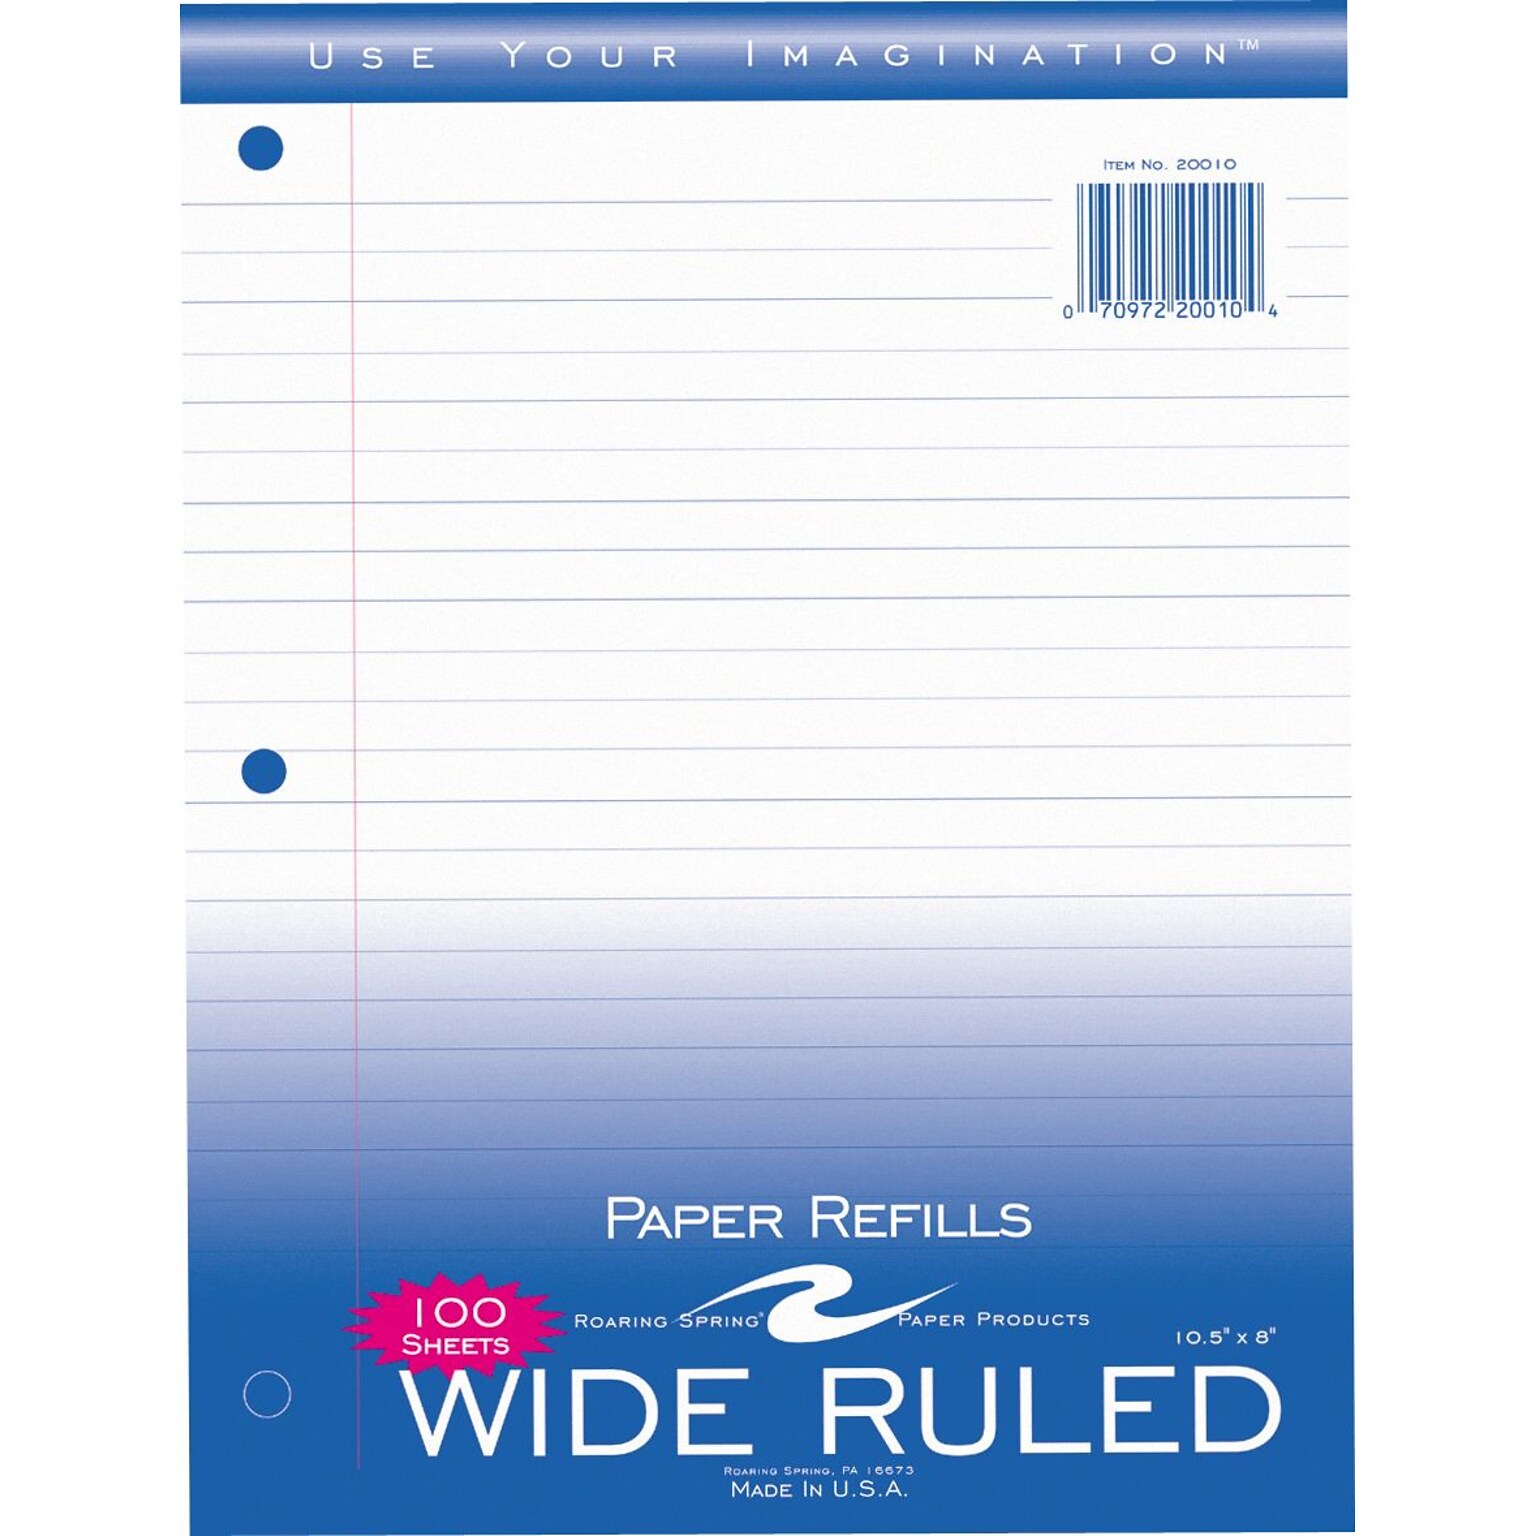 Roaring Spring Paper Products Wide Ruled Filler Paper, 8 x 10.5, 3-Hole Punched, 100 Sheets/Pack (20010)